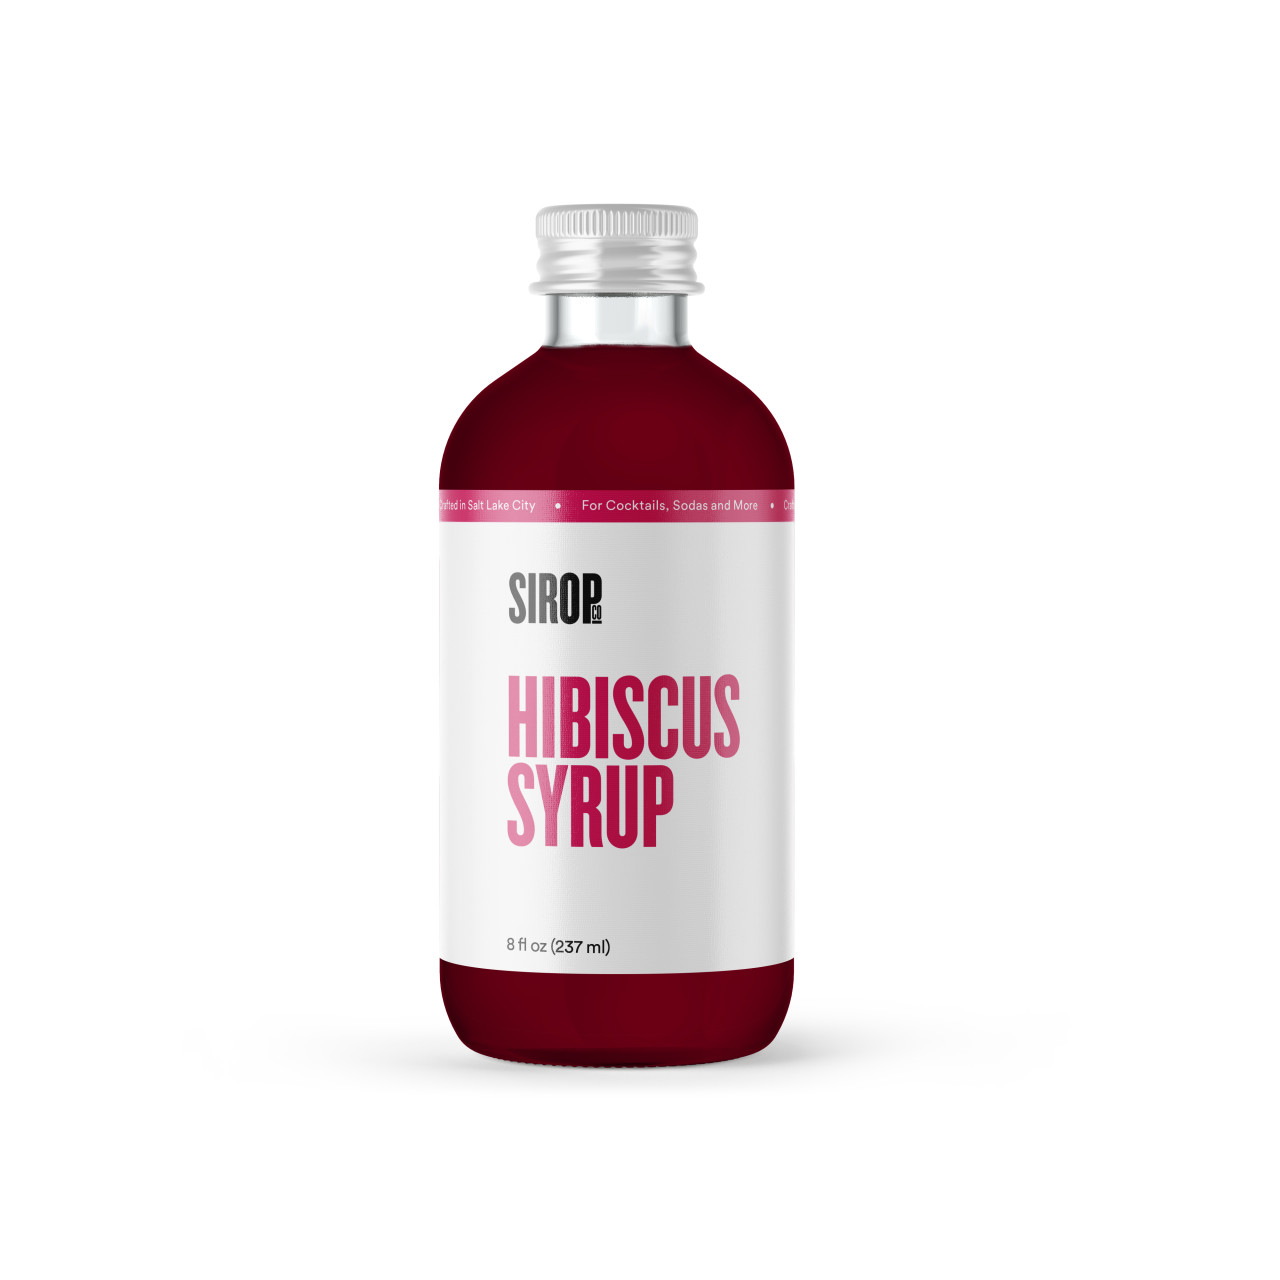 Sirop Inédit Pêche-Hibiscus - 70 cl